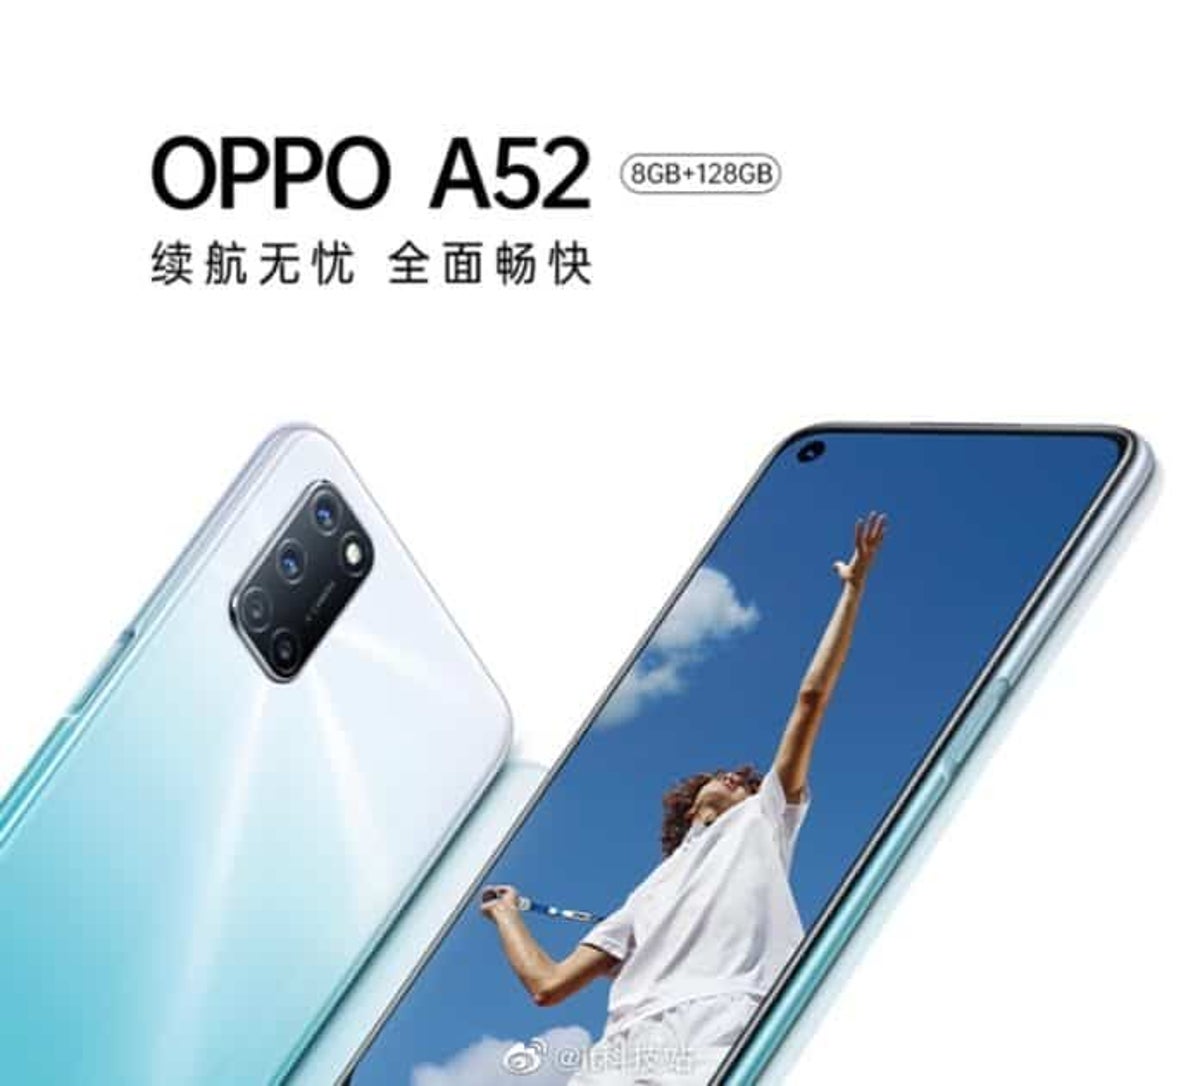 OPPO A52 Smartphone Review in Hindi Price in India Specification Features Camera Procceser RAM Internal Storage Launch Date सभी जानकारी हिंदी में पढ़े